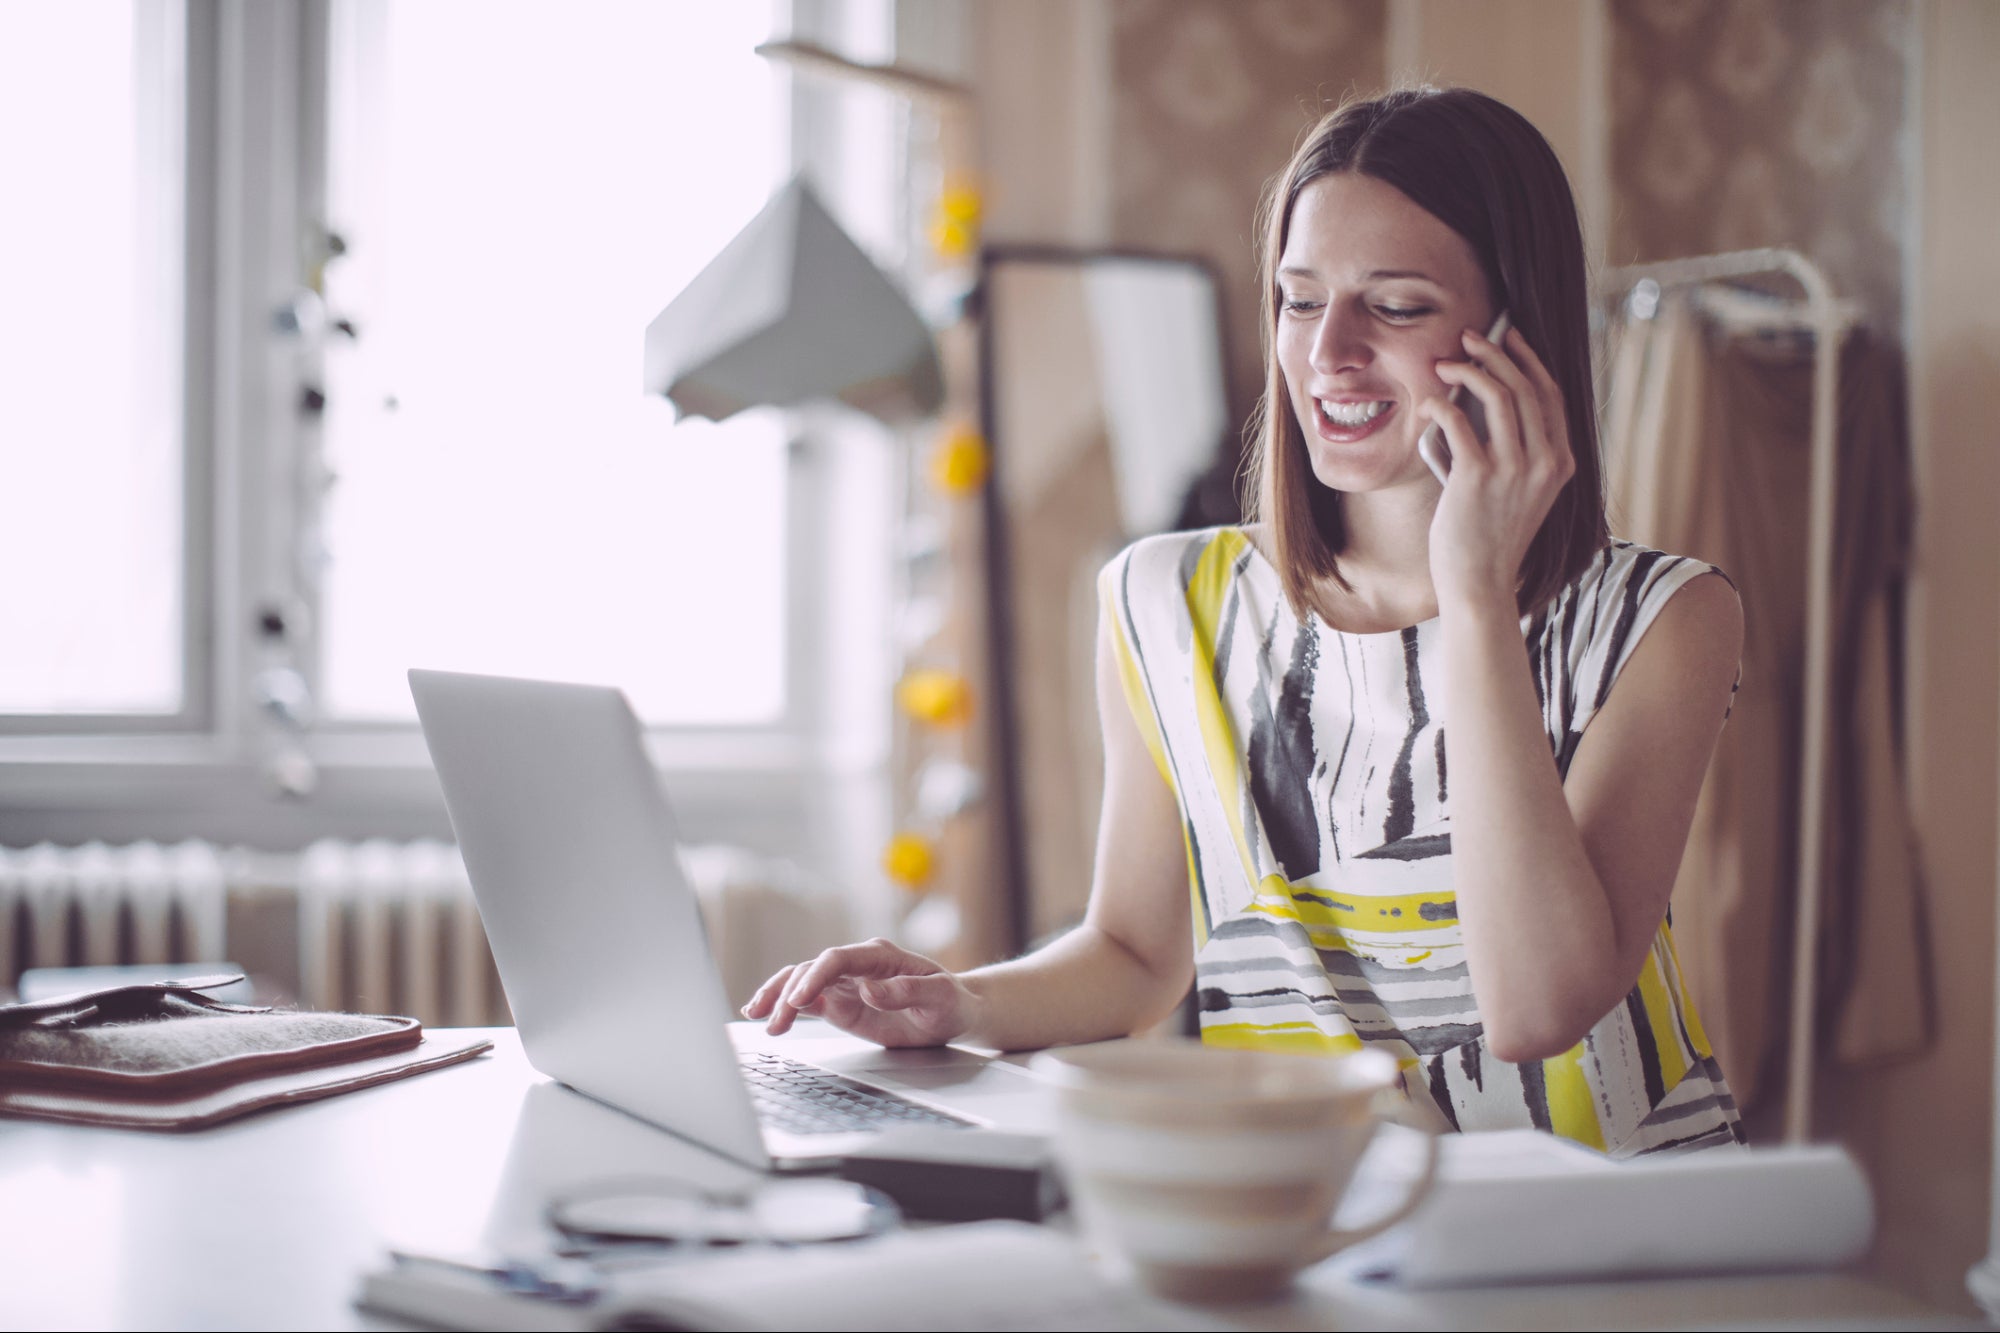 4 Essential Traits for Great Remote Workers